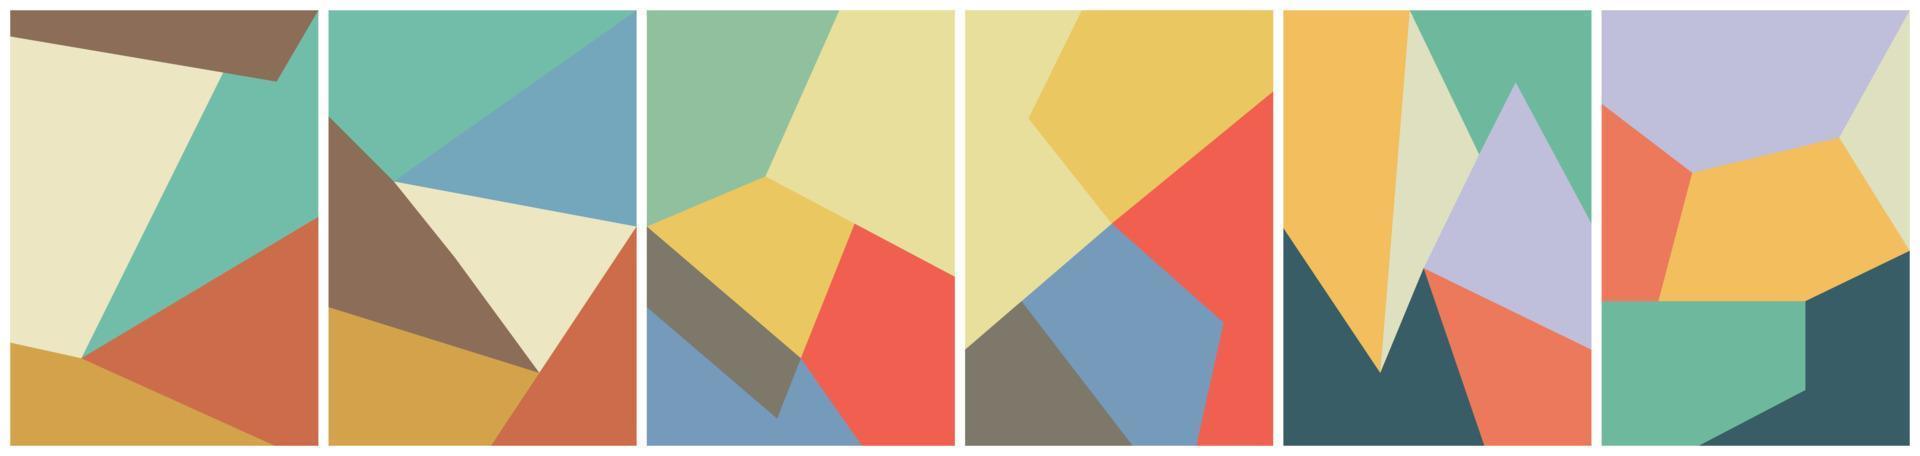 6 six sets of polygonal abstract vectors. Overlapping geometric shapes. With vintage color style. 70s retro style. Suitable for flyers, book covers, social media templates etc. vector